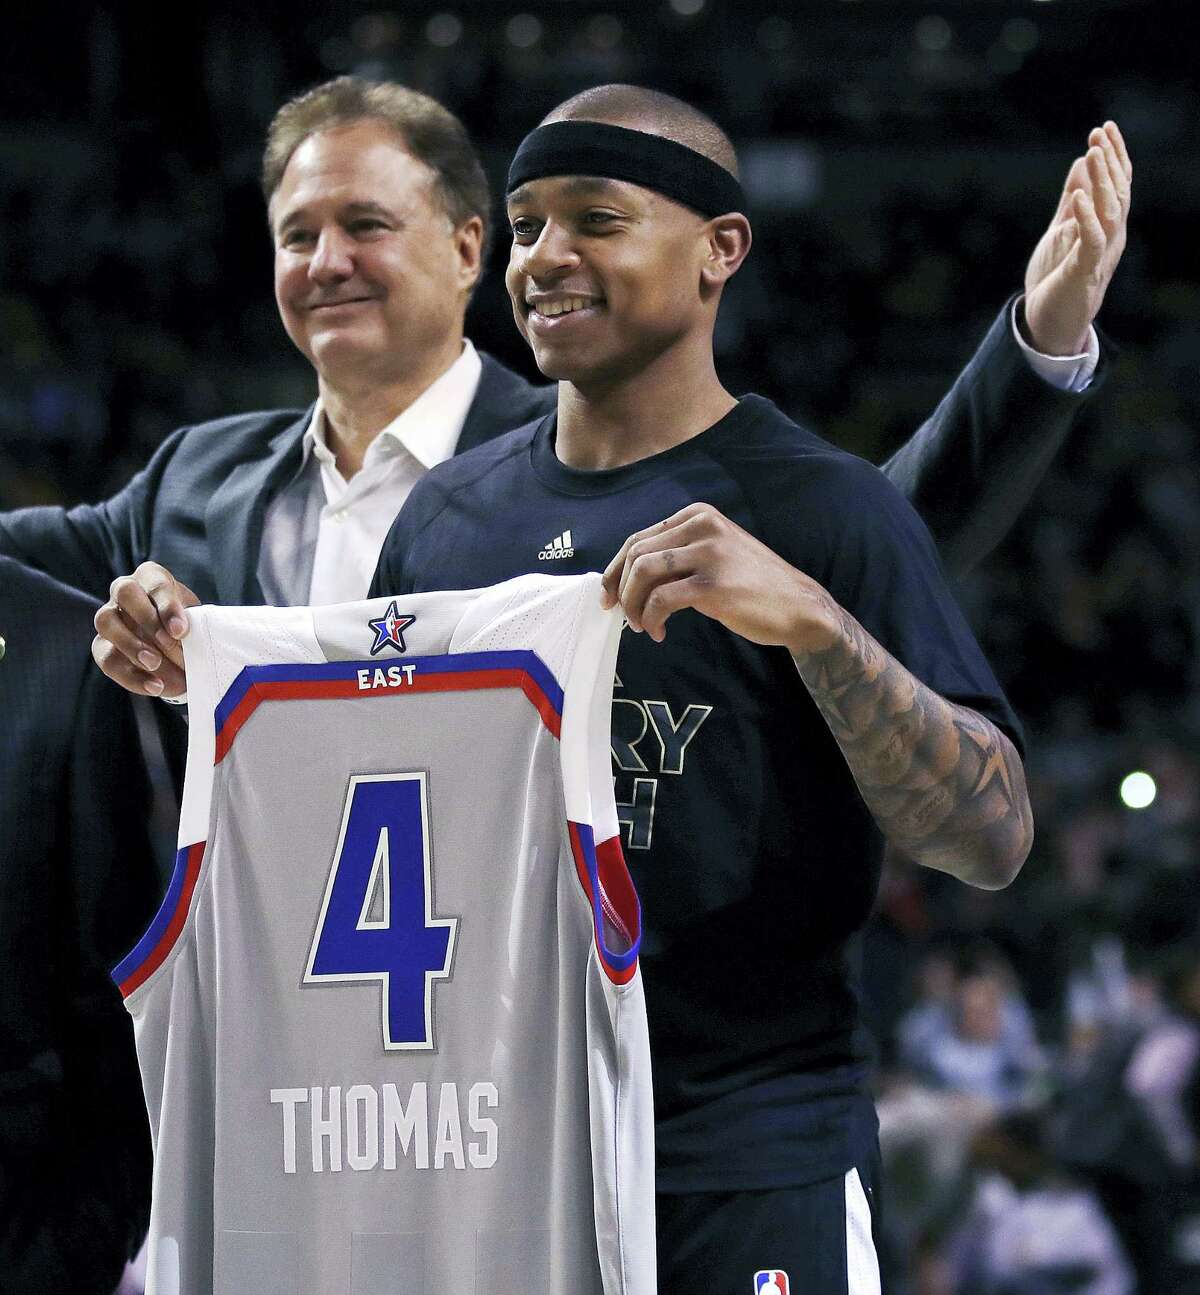 Wizards' Isaiah Thomas: Celtics glory is the past, but 'I'm going